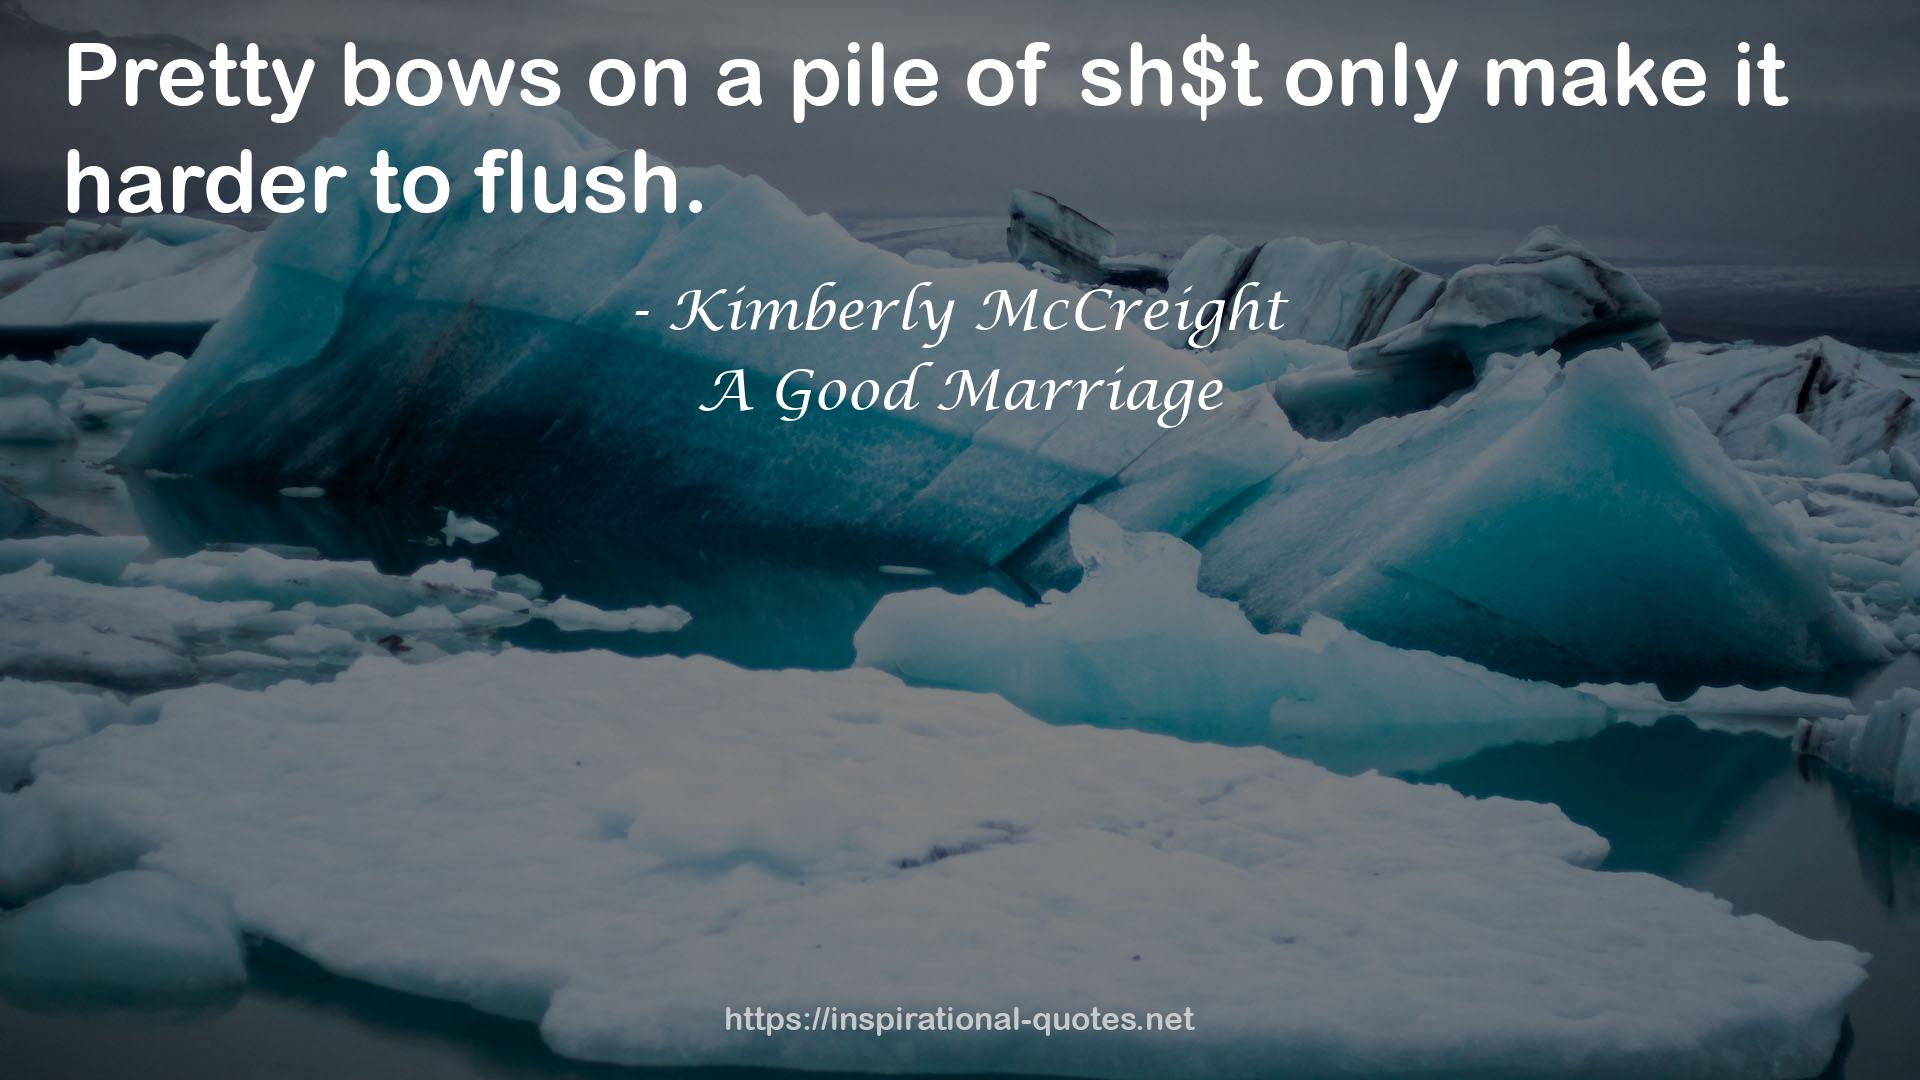 A Good Marriage QUOTES